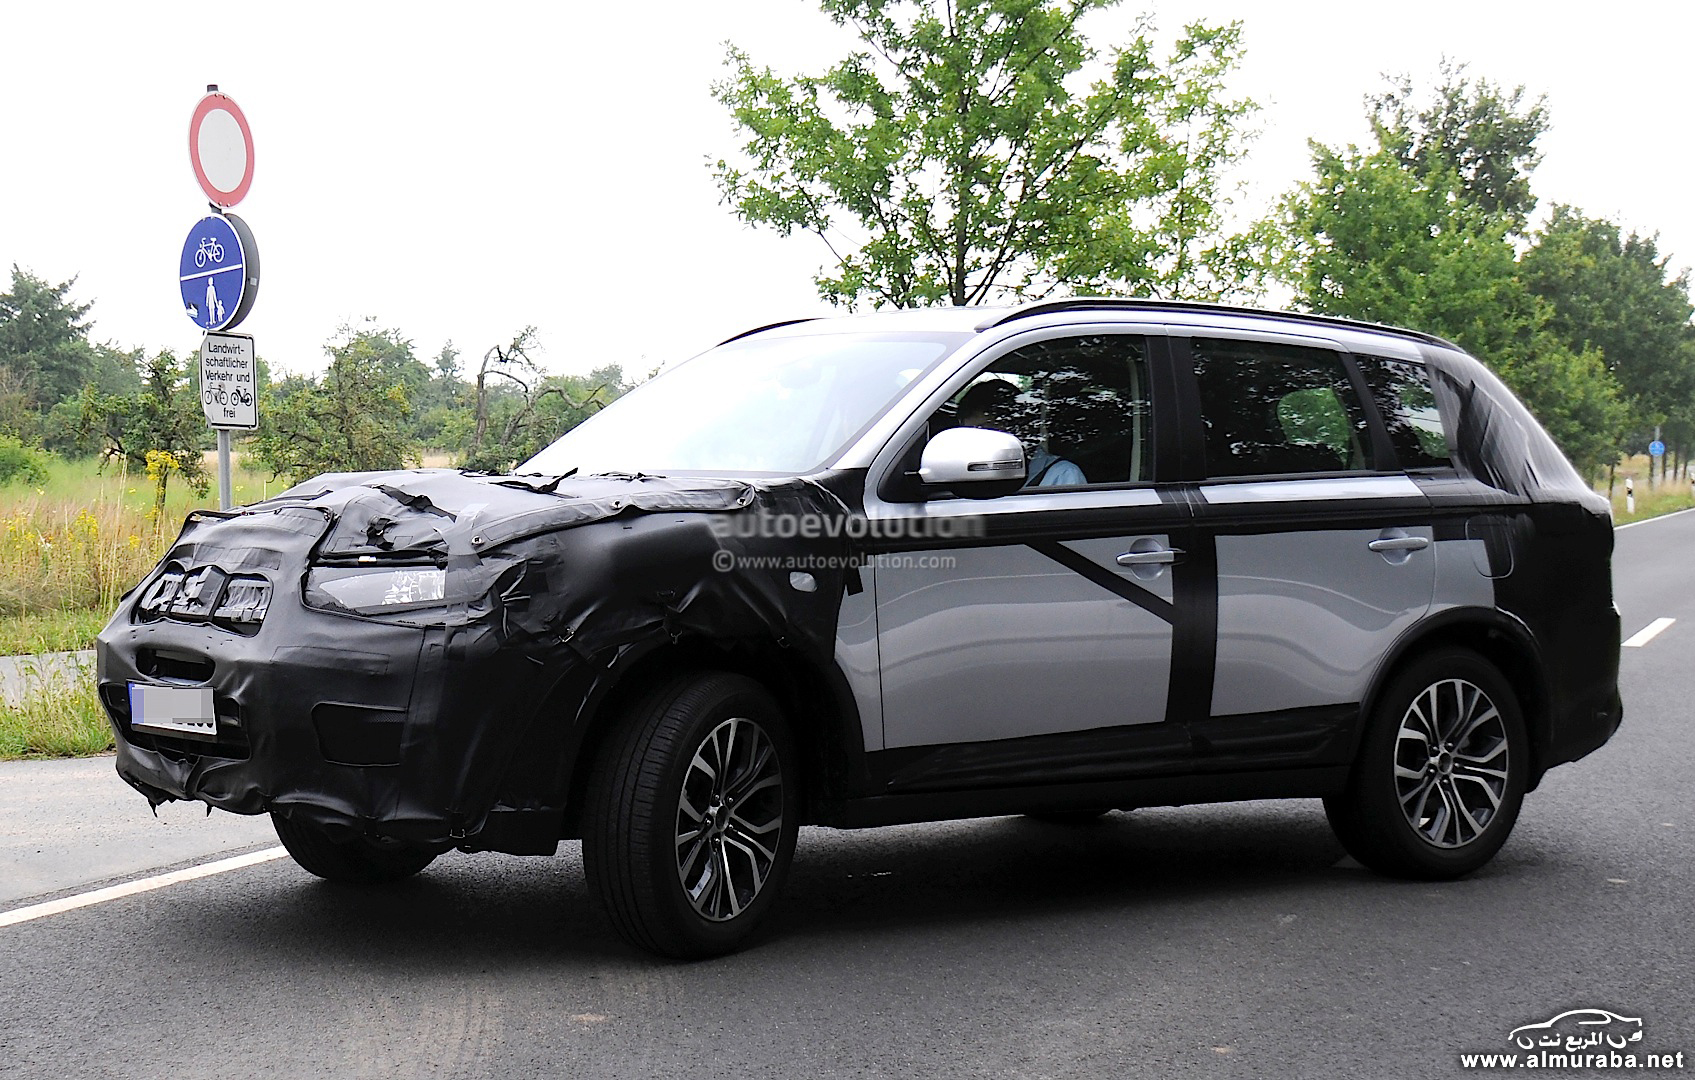 2015-mitsubishi-outlander-spied-again-this-time-in-europe-photo-gallery_6